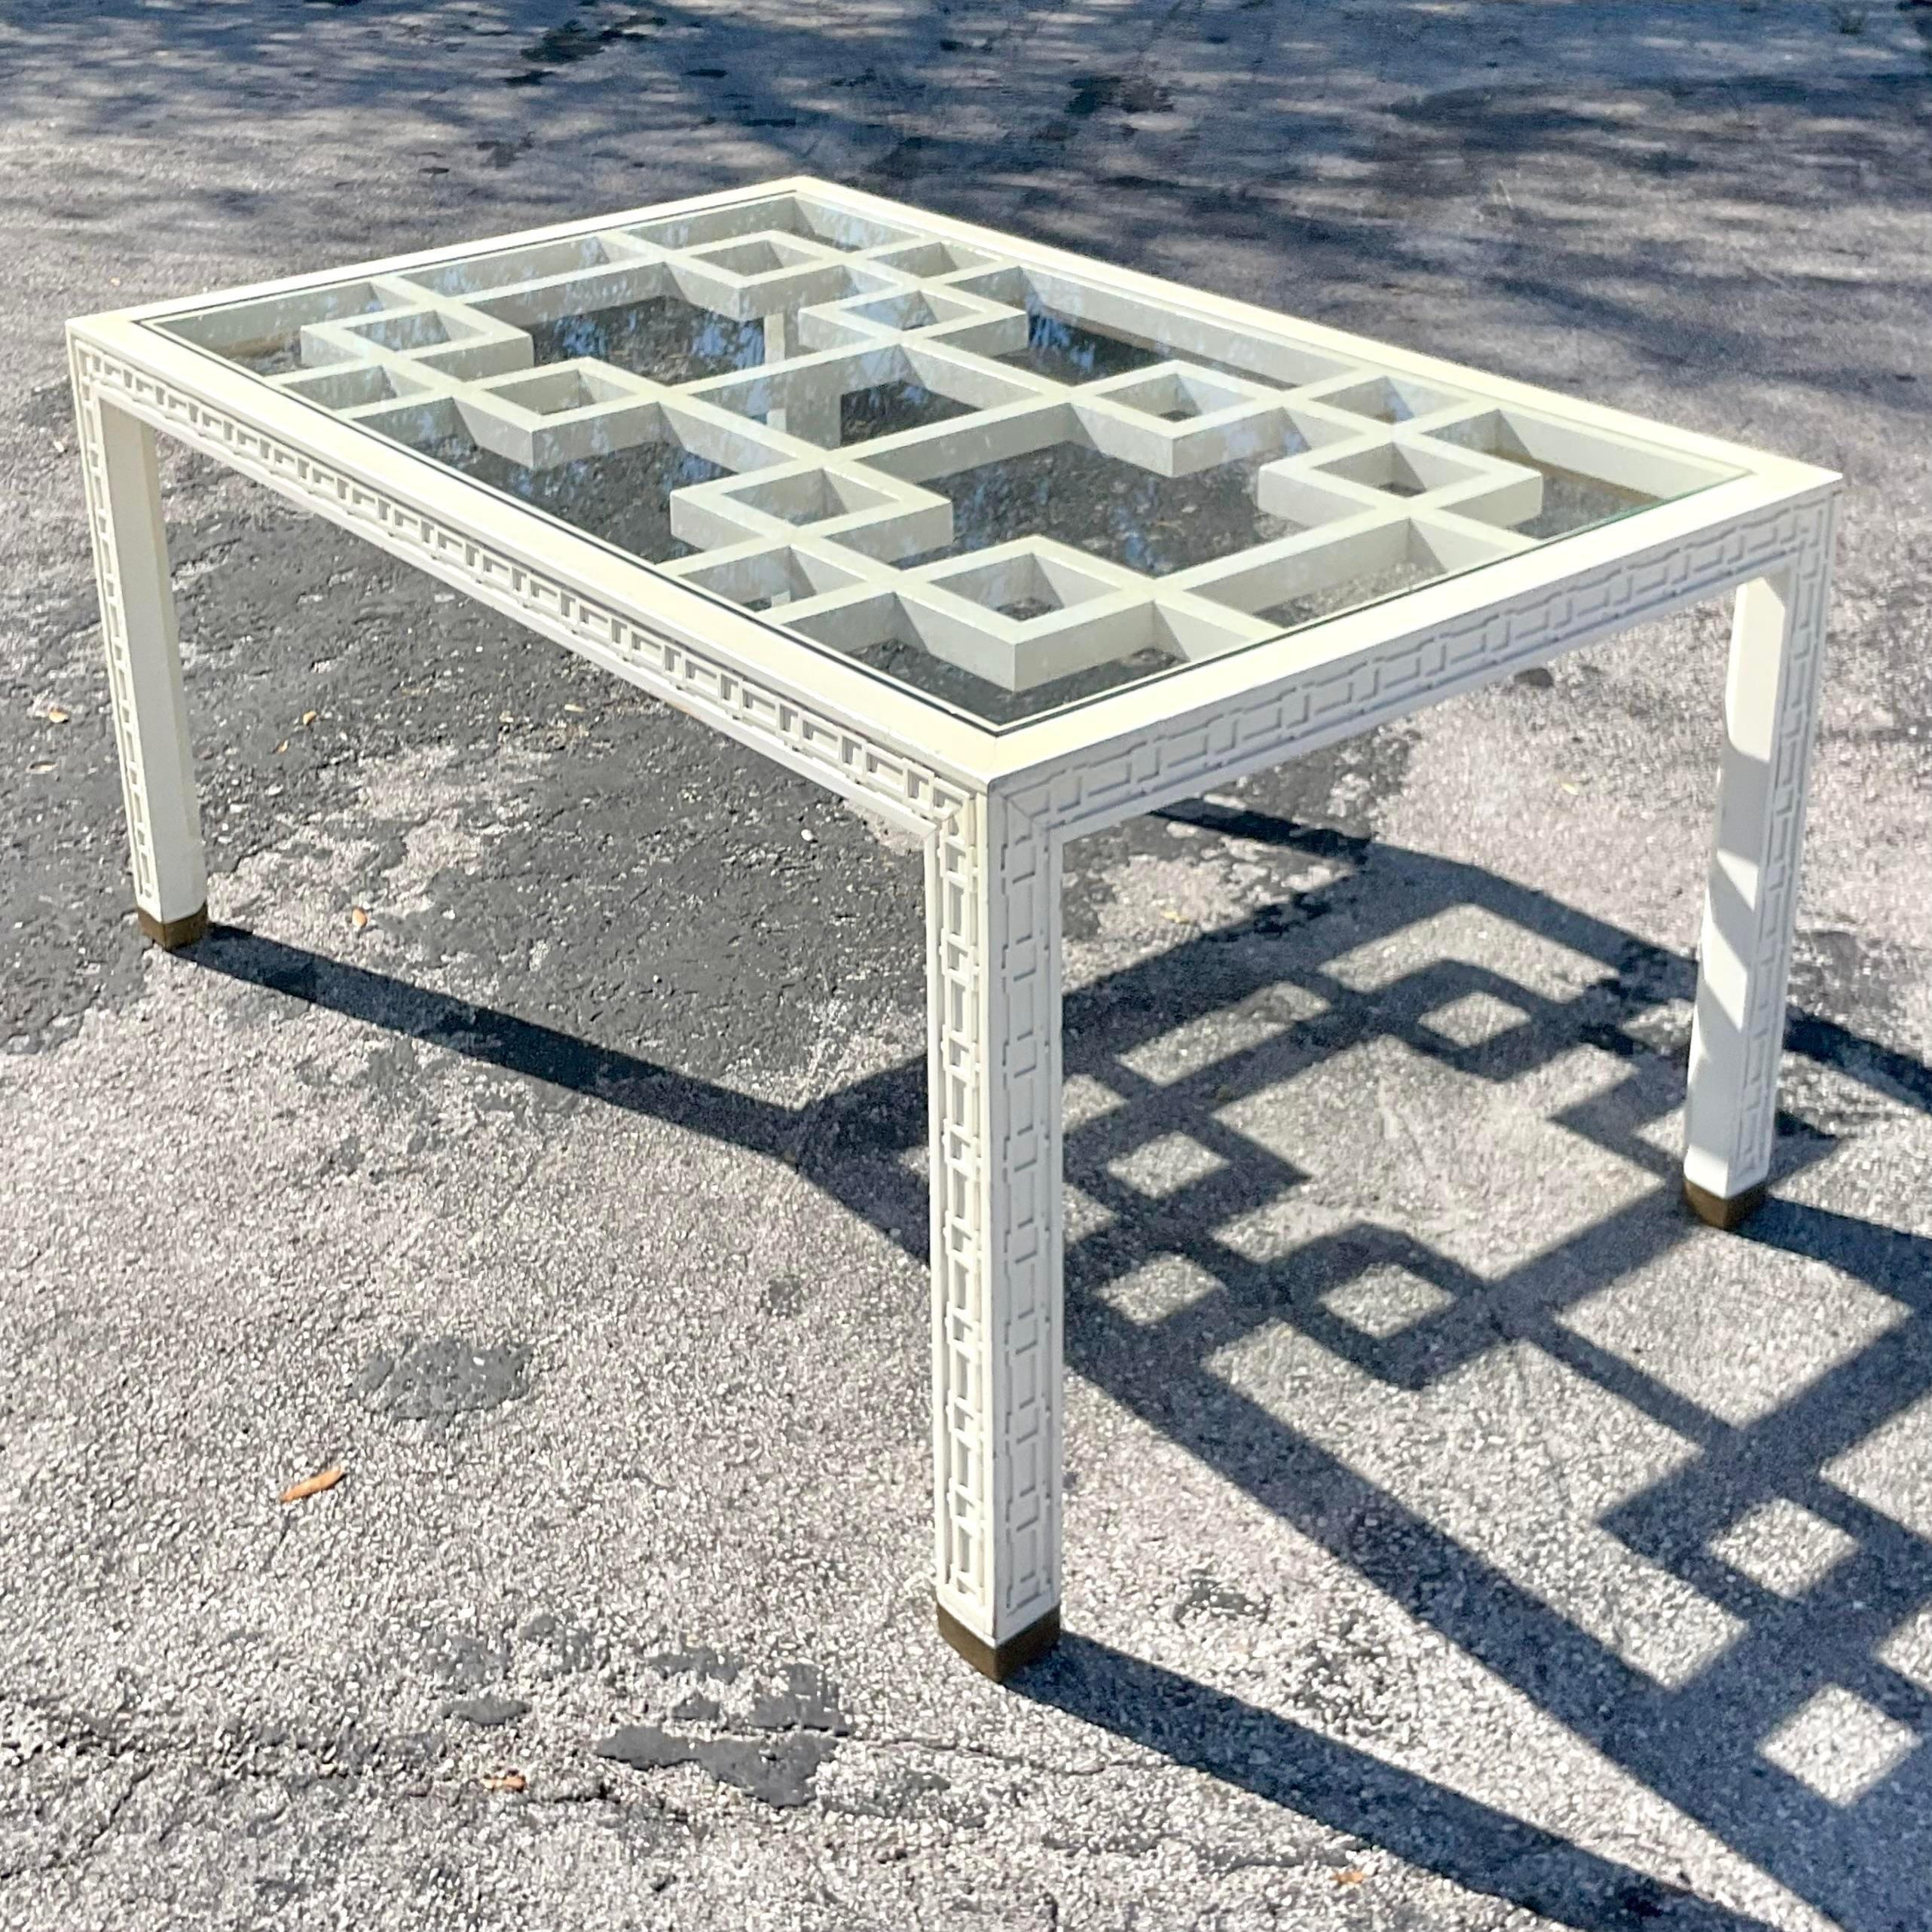 A fabulous vintage Regency dining table. A gorgeous Fretwork design with a massive inset fretwork panel below inset glass. A beautiful trim of fretwork along the edge. Acquired from a Palm Beach estate.